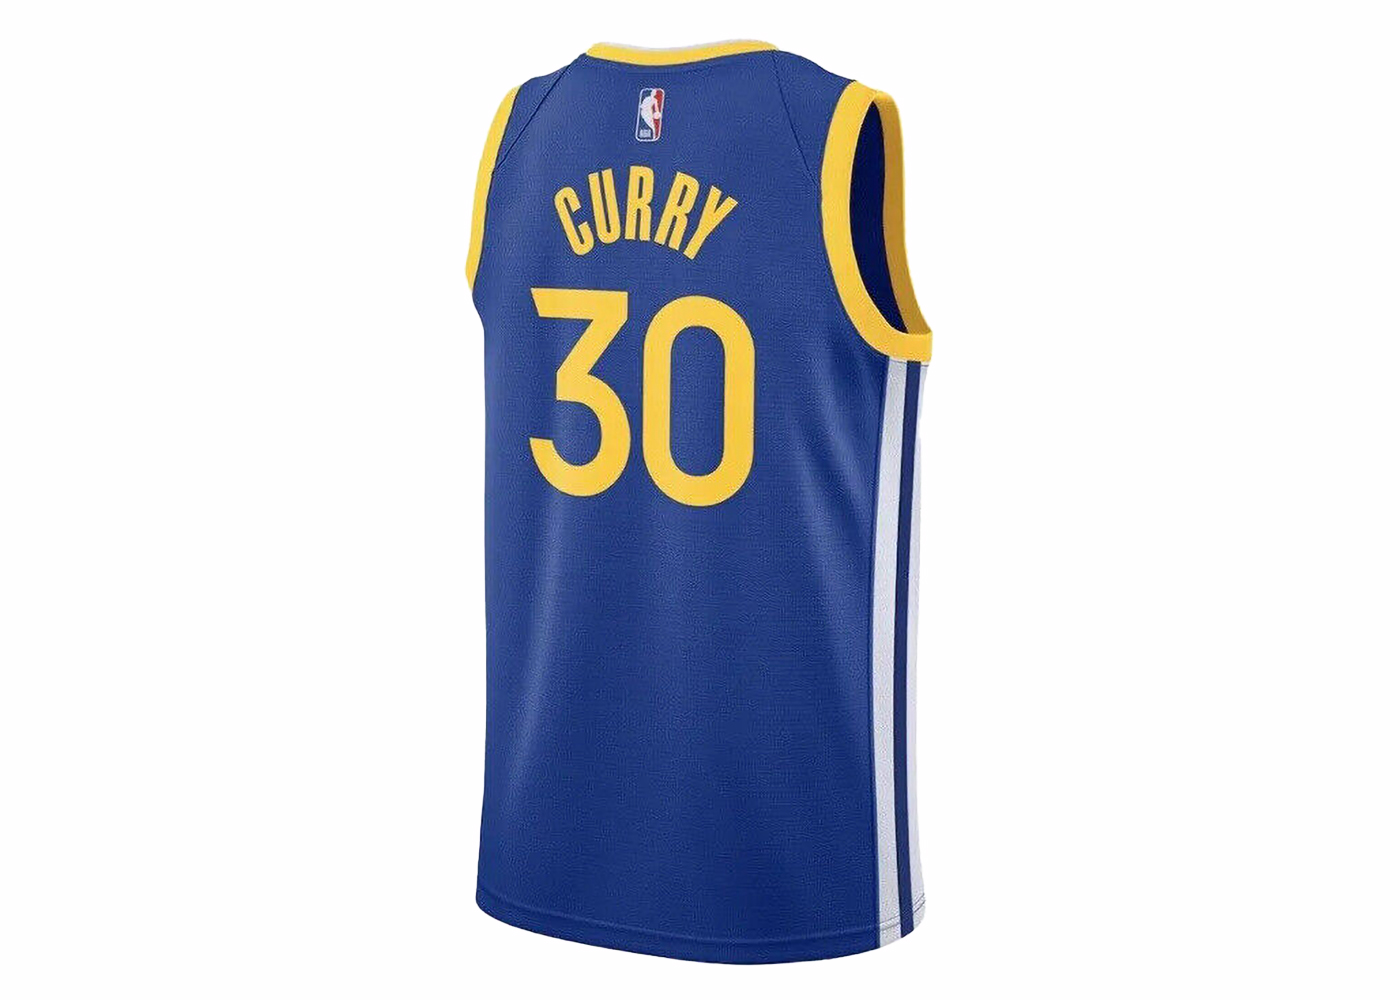 stephen curry jersey blue and yellow